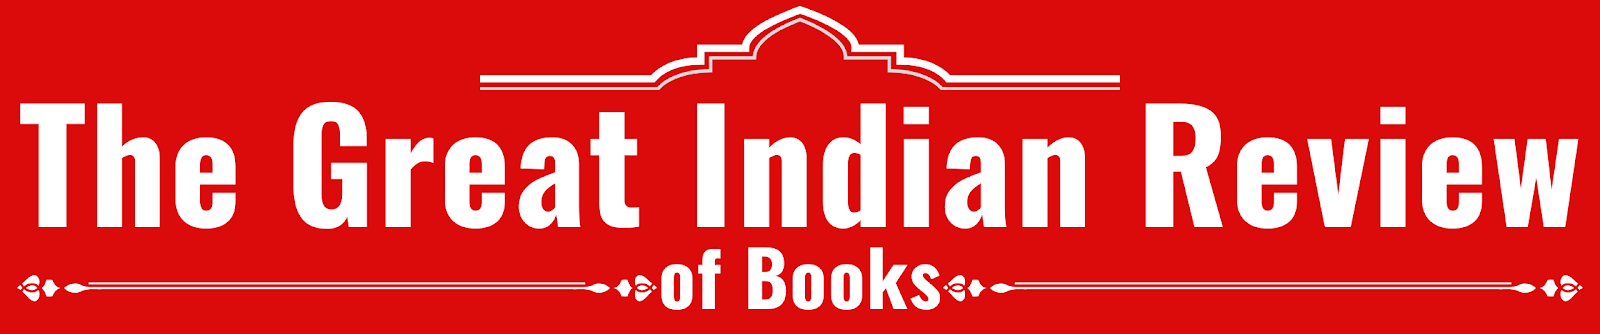 The Great Indian Review of Books